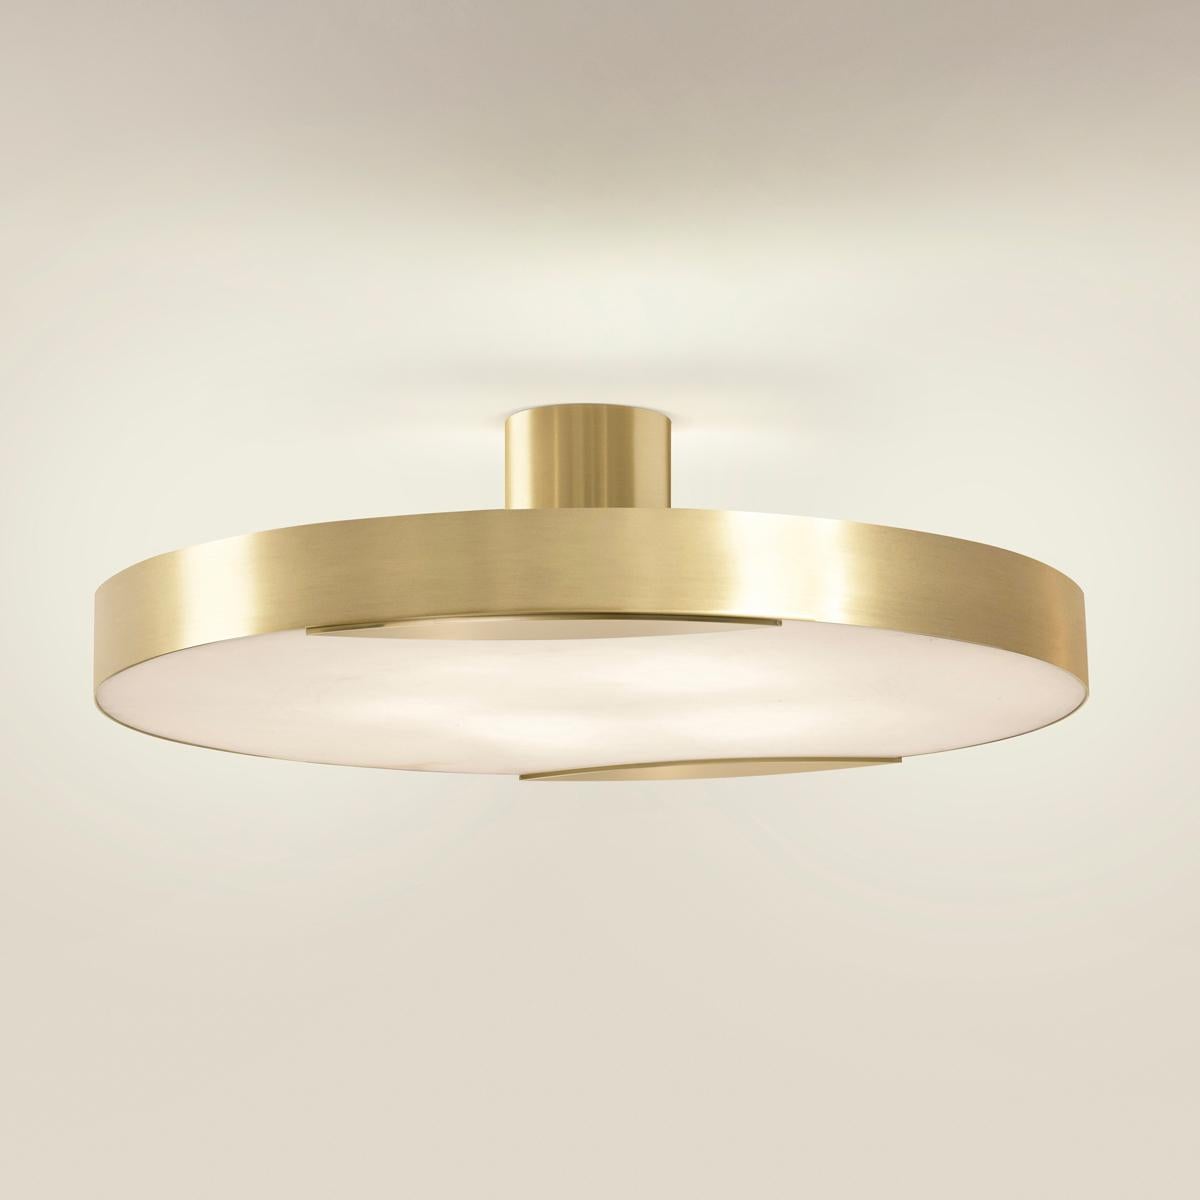 Modern Cloud N.1 Ceiling Light by Gaspare Asaro-Satin Brass Finish For Sale